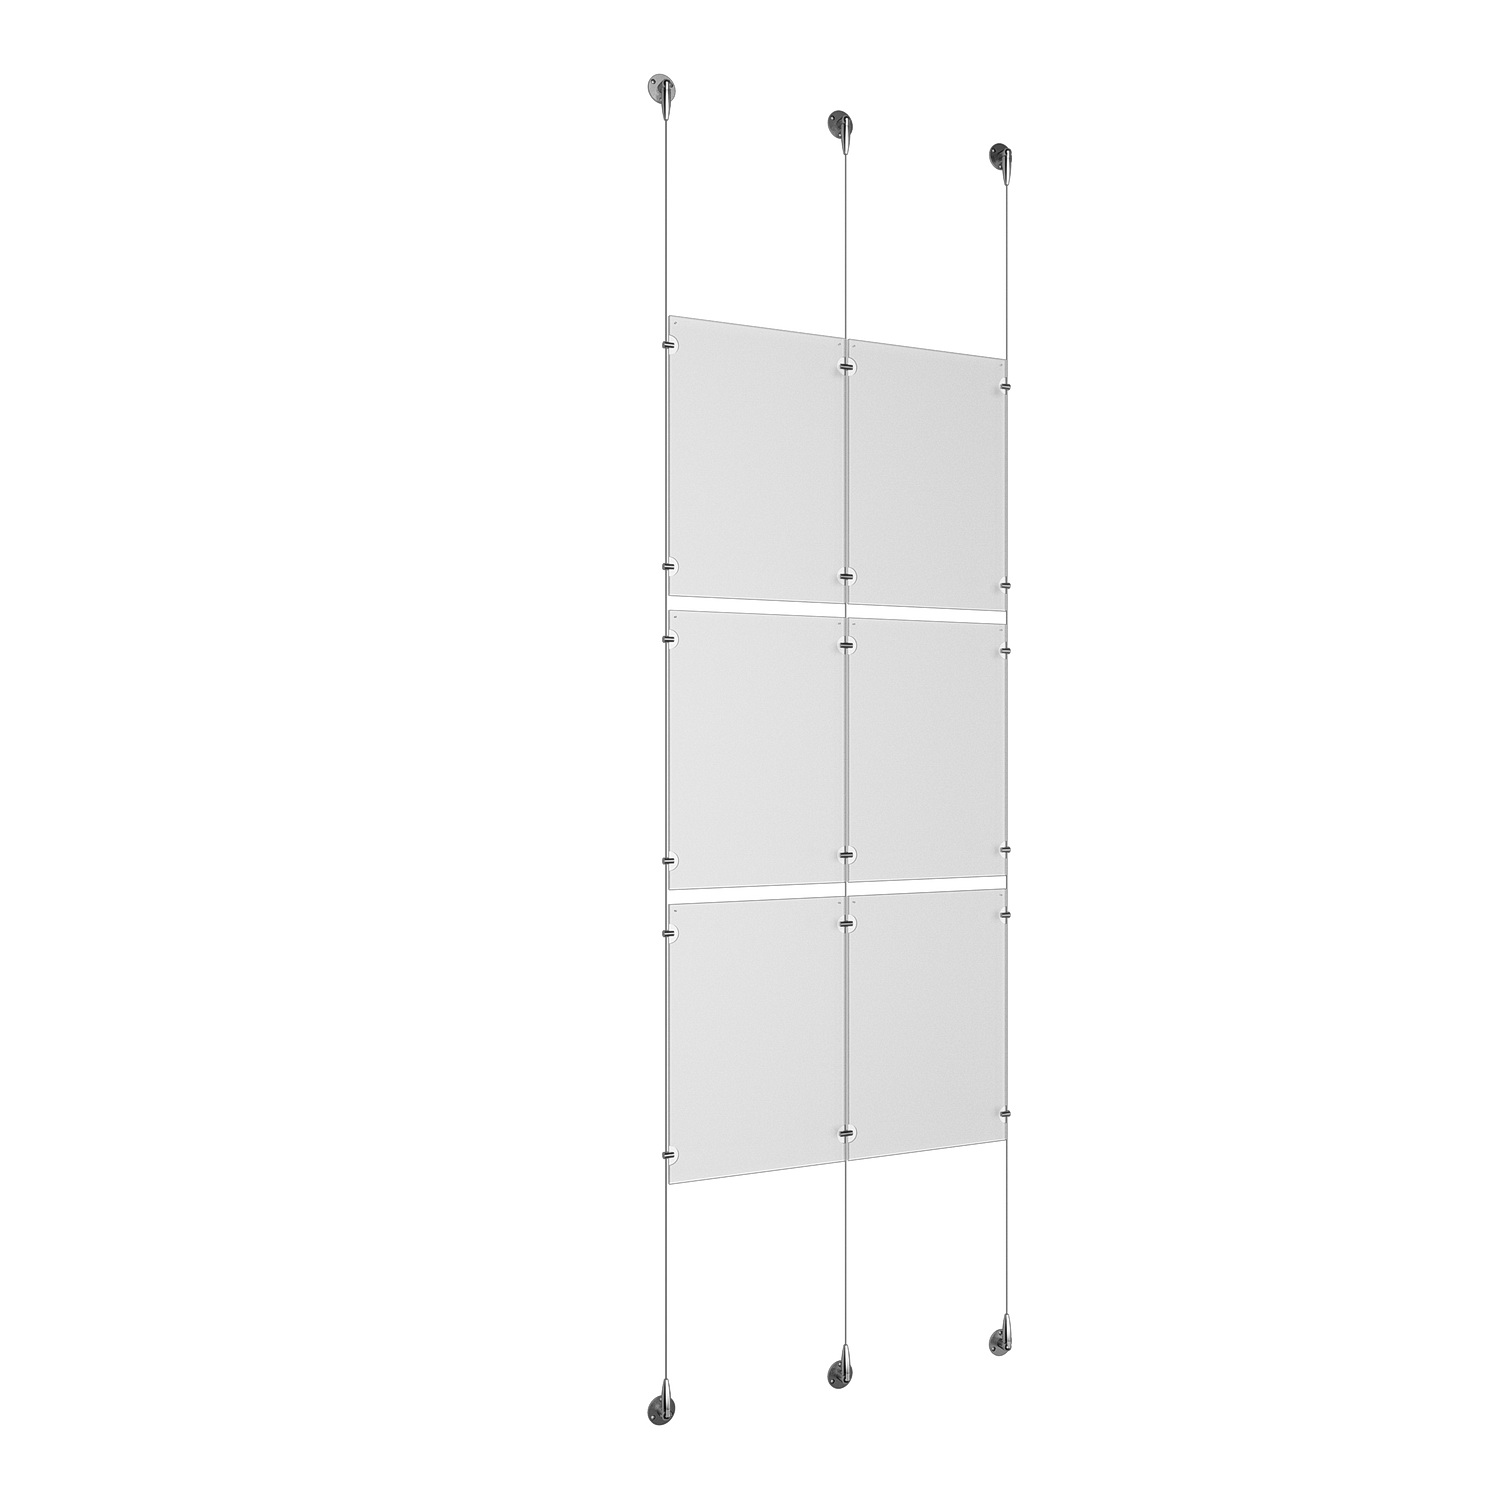 (6) 11'' Width x 17'' Height Clear Acrylic Frame & (3) Aluminum Chrome Polished Adjustable Angle Signature Cable Systems with (12) Single-Sided Panel Grippers (6) Double-Sided Panel Grippers